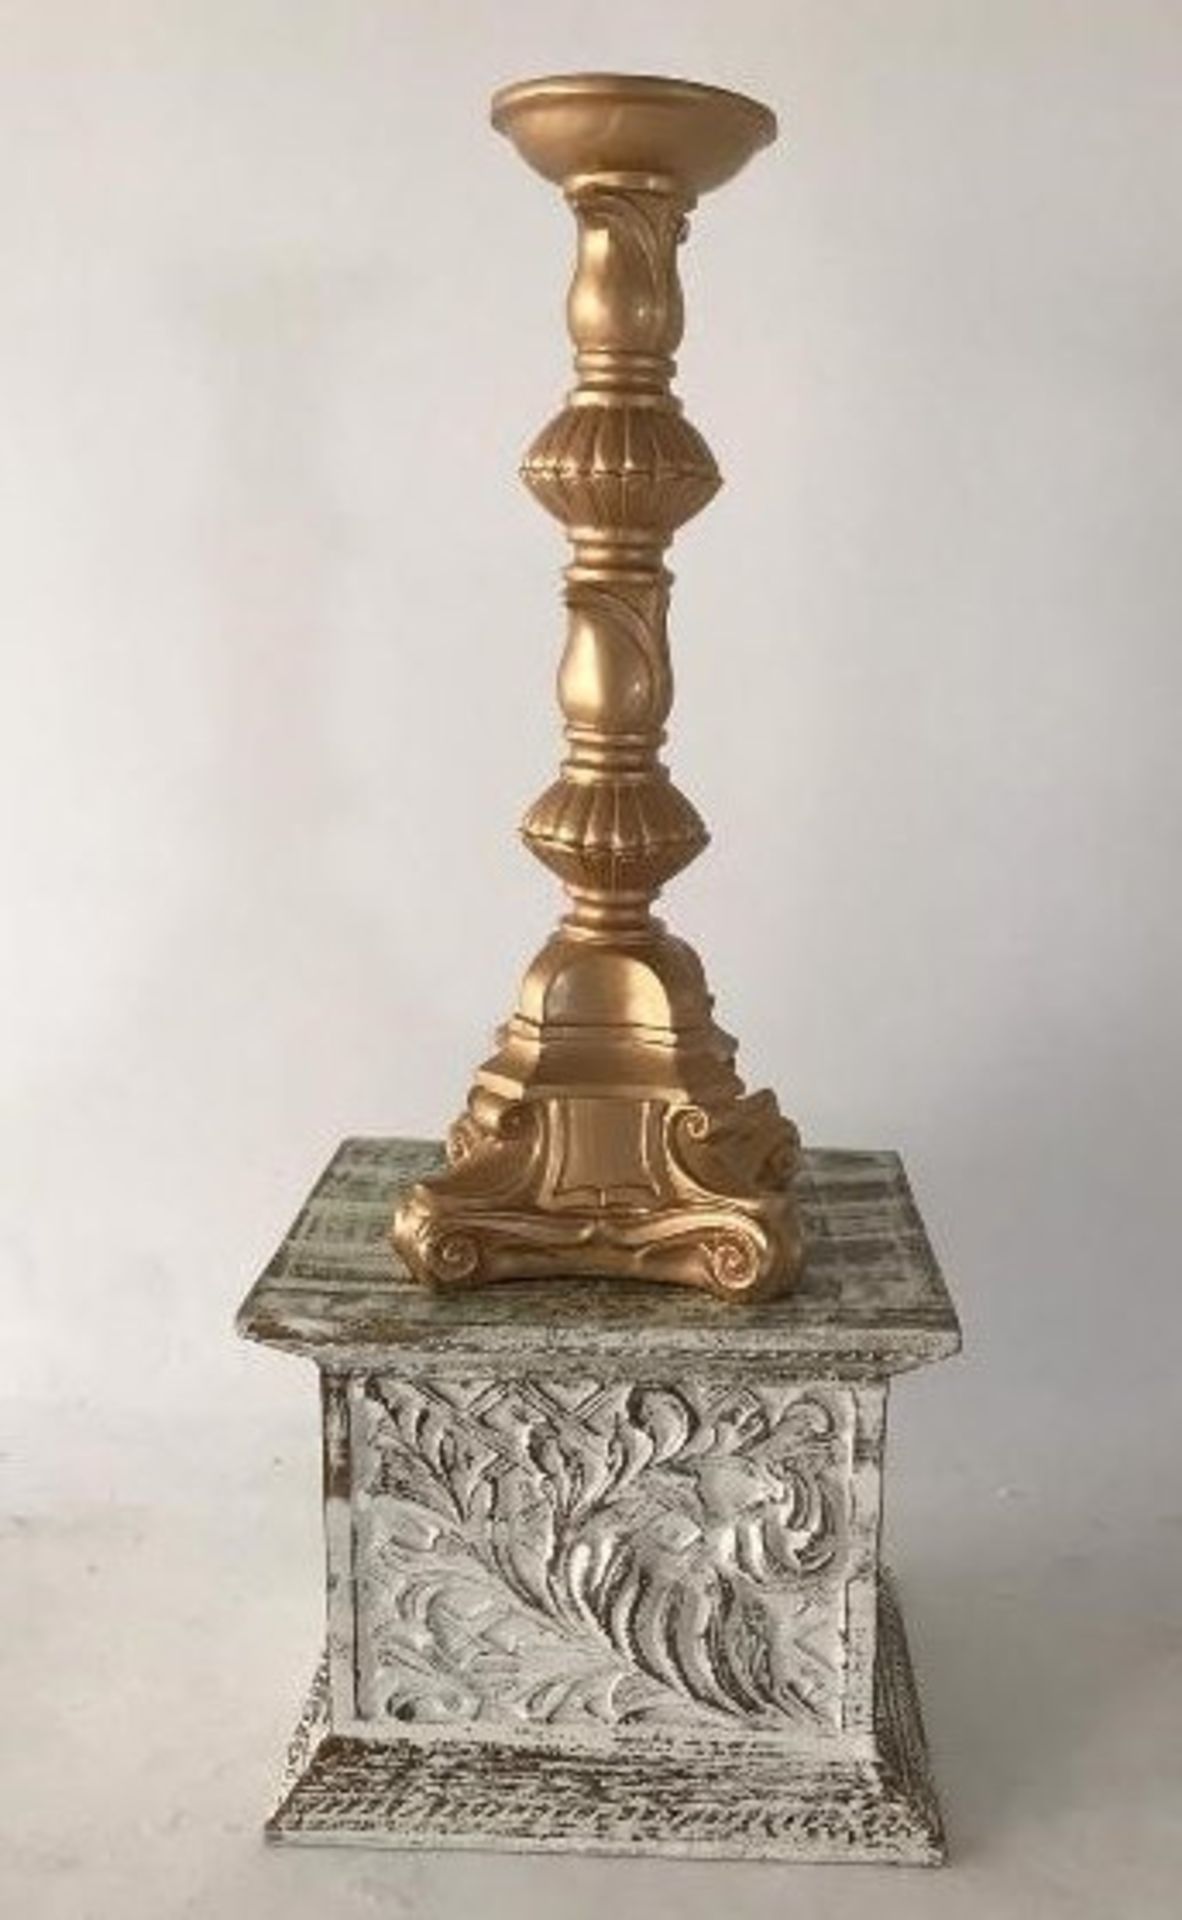 2 x Ornate Gold Flower Stands - Dimensions: 1.2m - Pre-owned - CL548 - Location: Near Market - Image 3 of 3